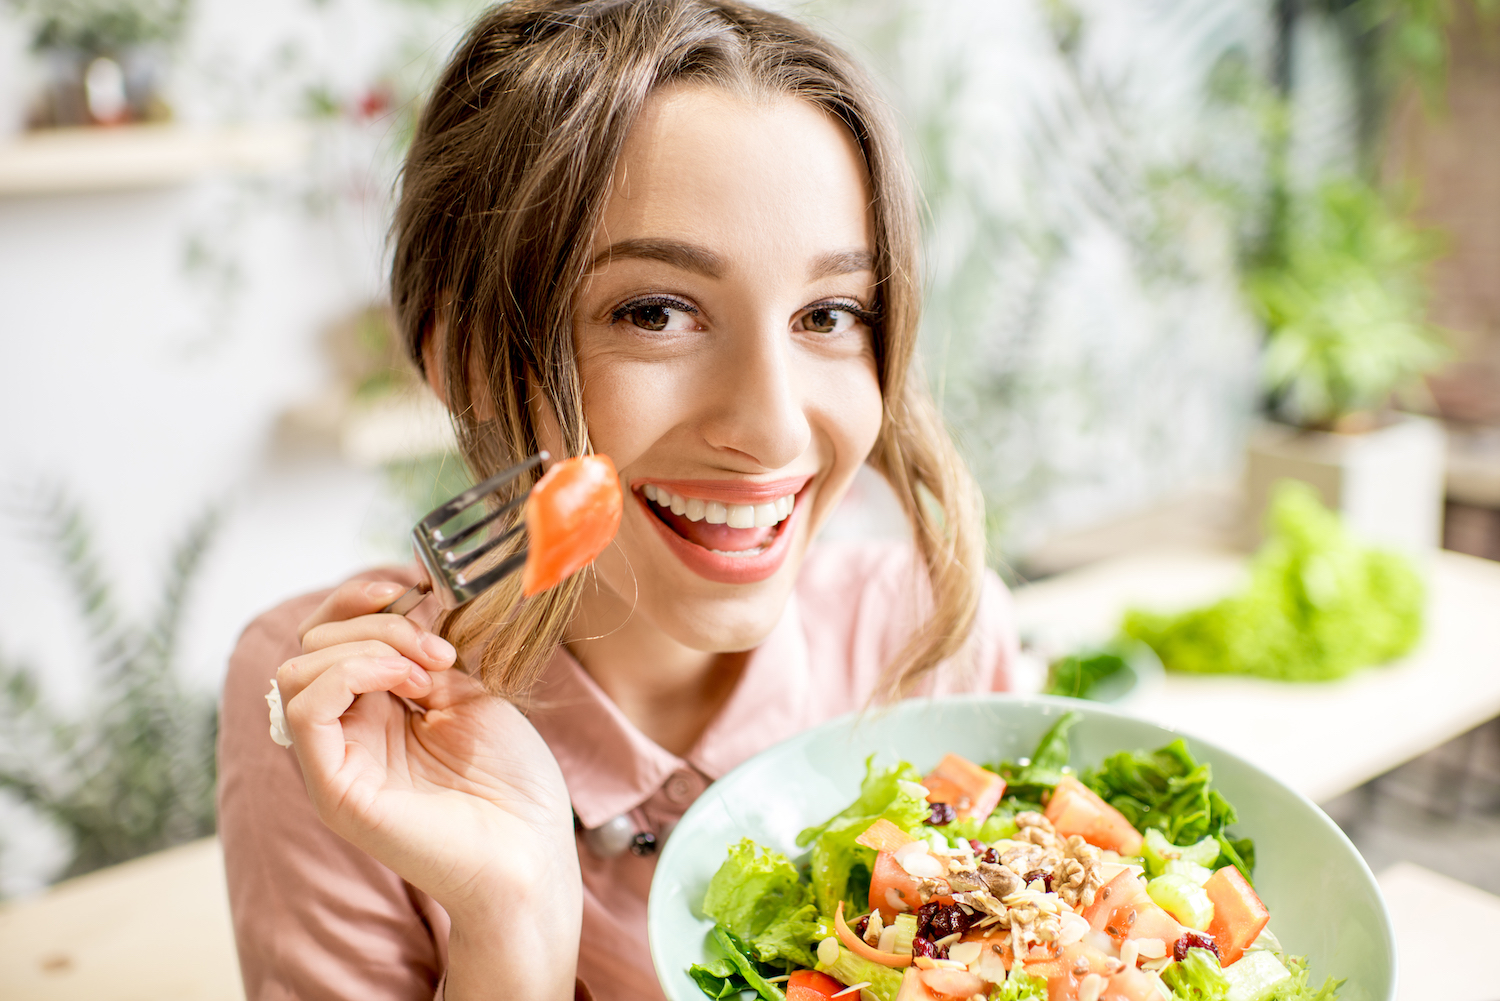 Young and playful woman eating healthy food sitting indoors on the green background